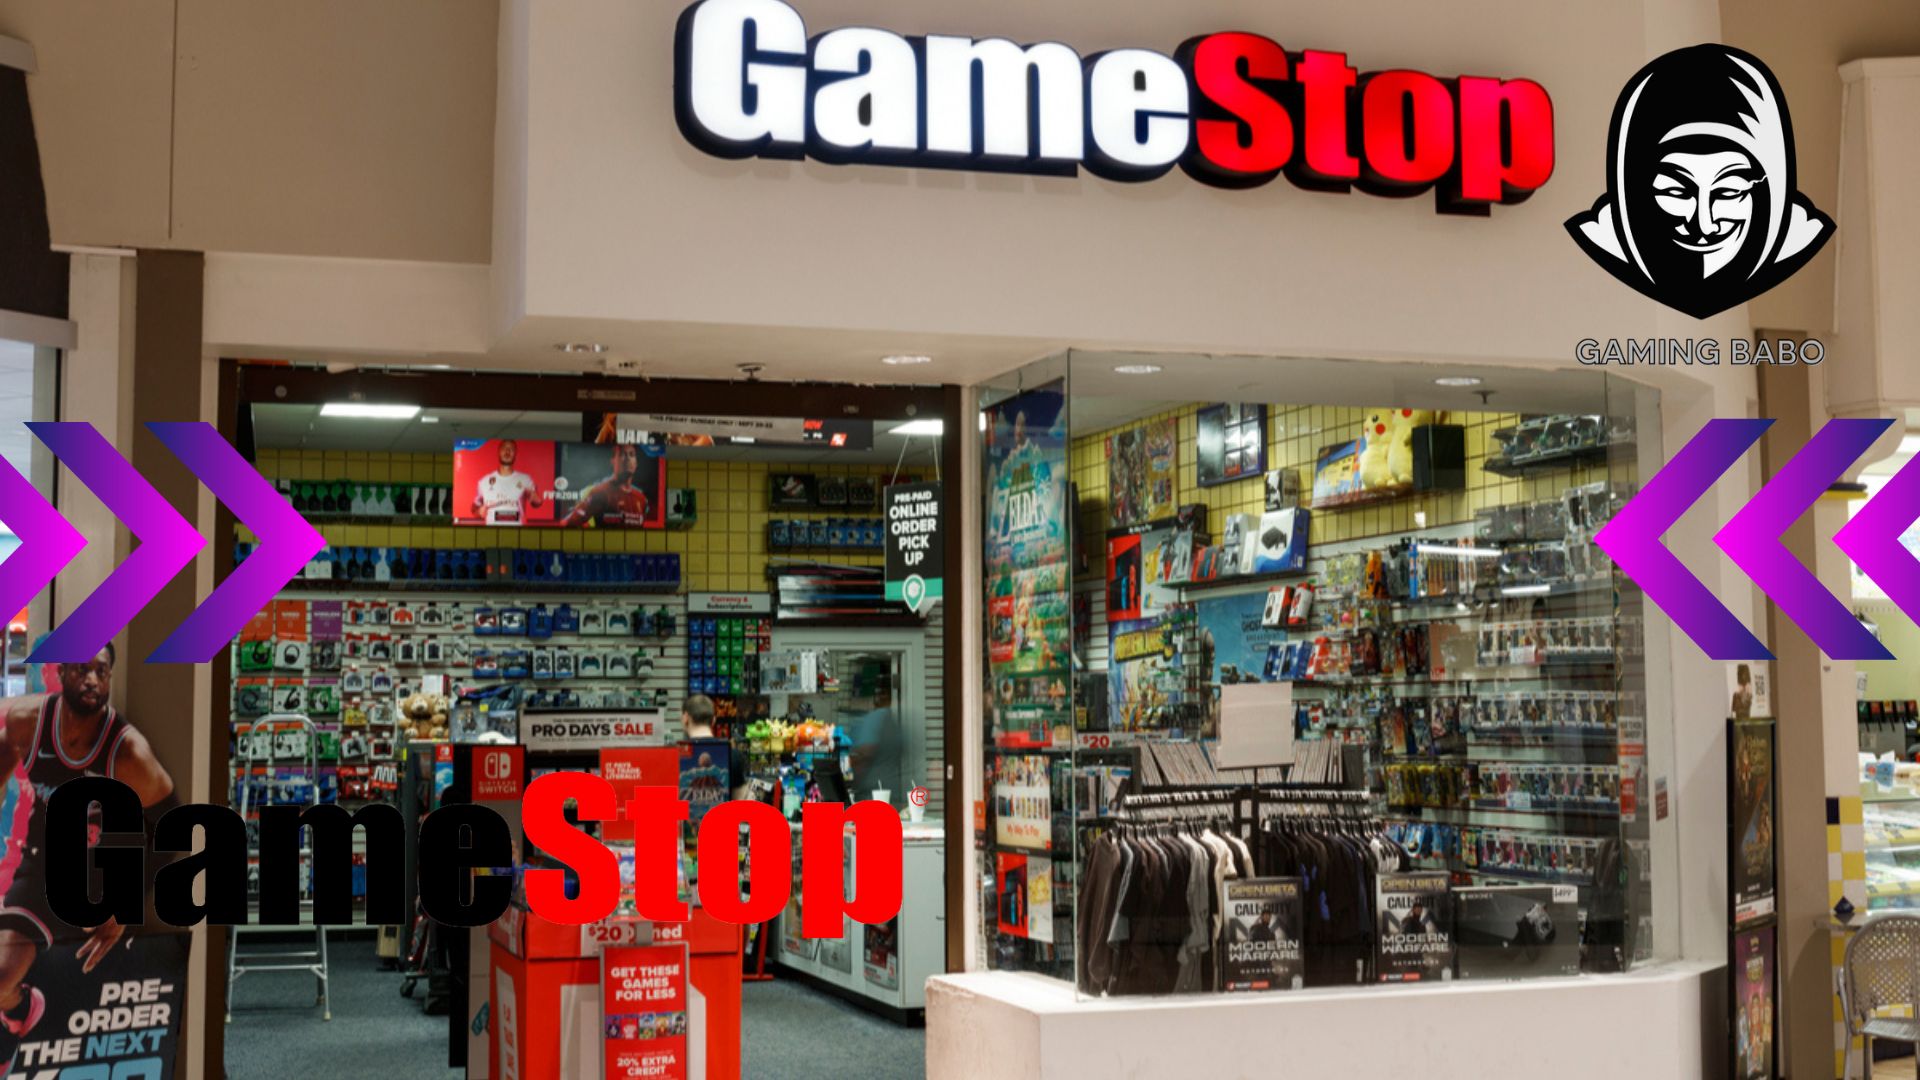 Gamestop Giftcard tips and tricks